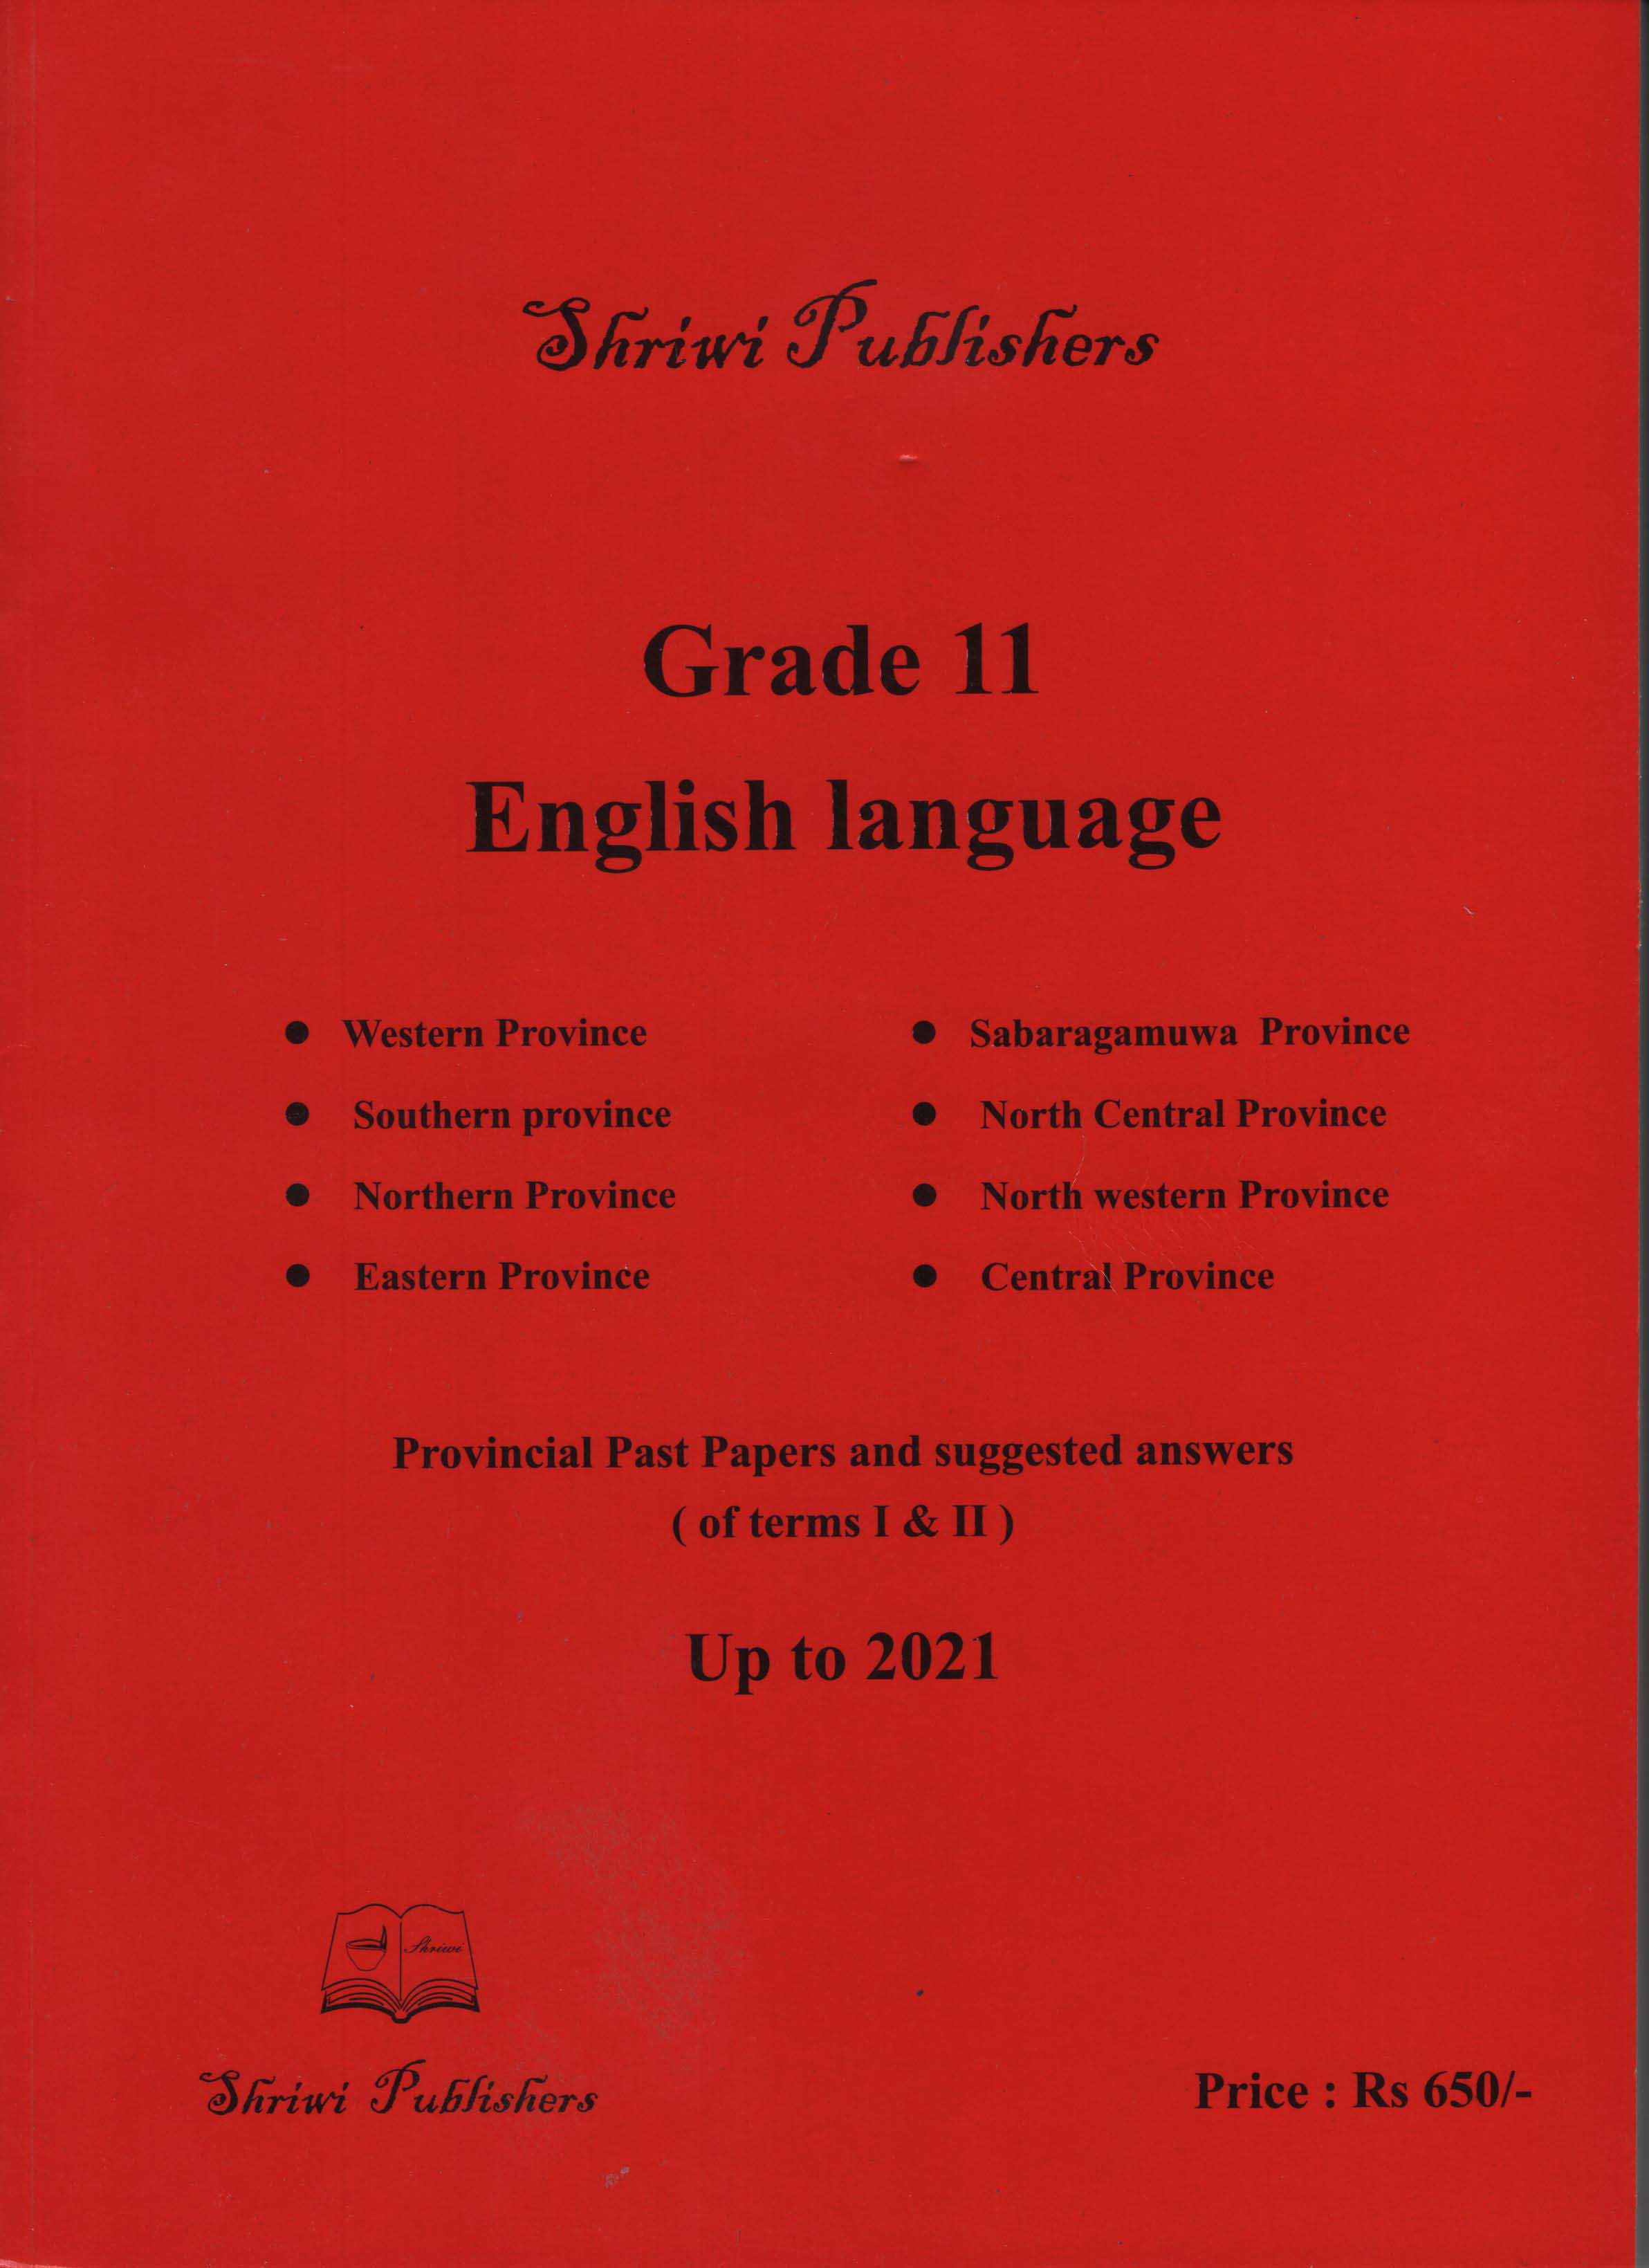 Shriwi Grade 11 English Language Provincial Past Papers 1st & 2nd Terms With Suggested Answers  Up to 2021